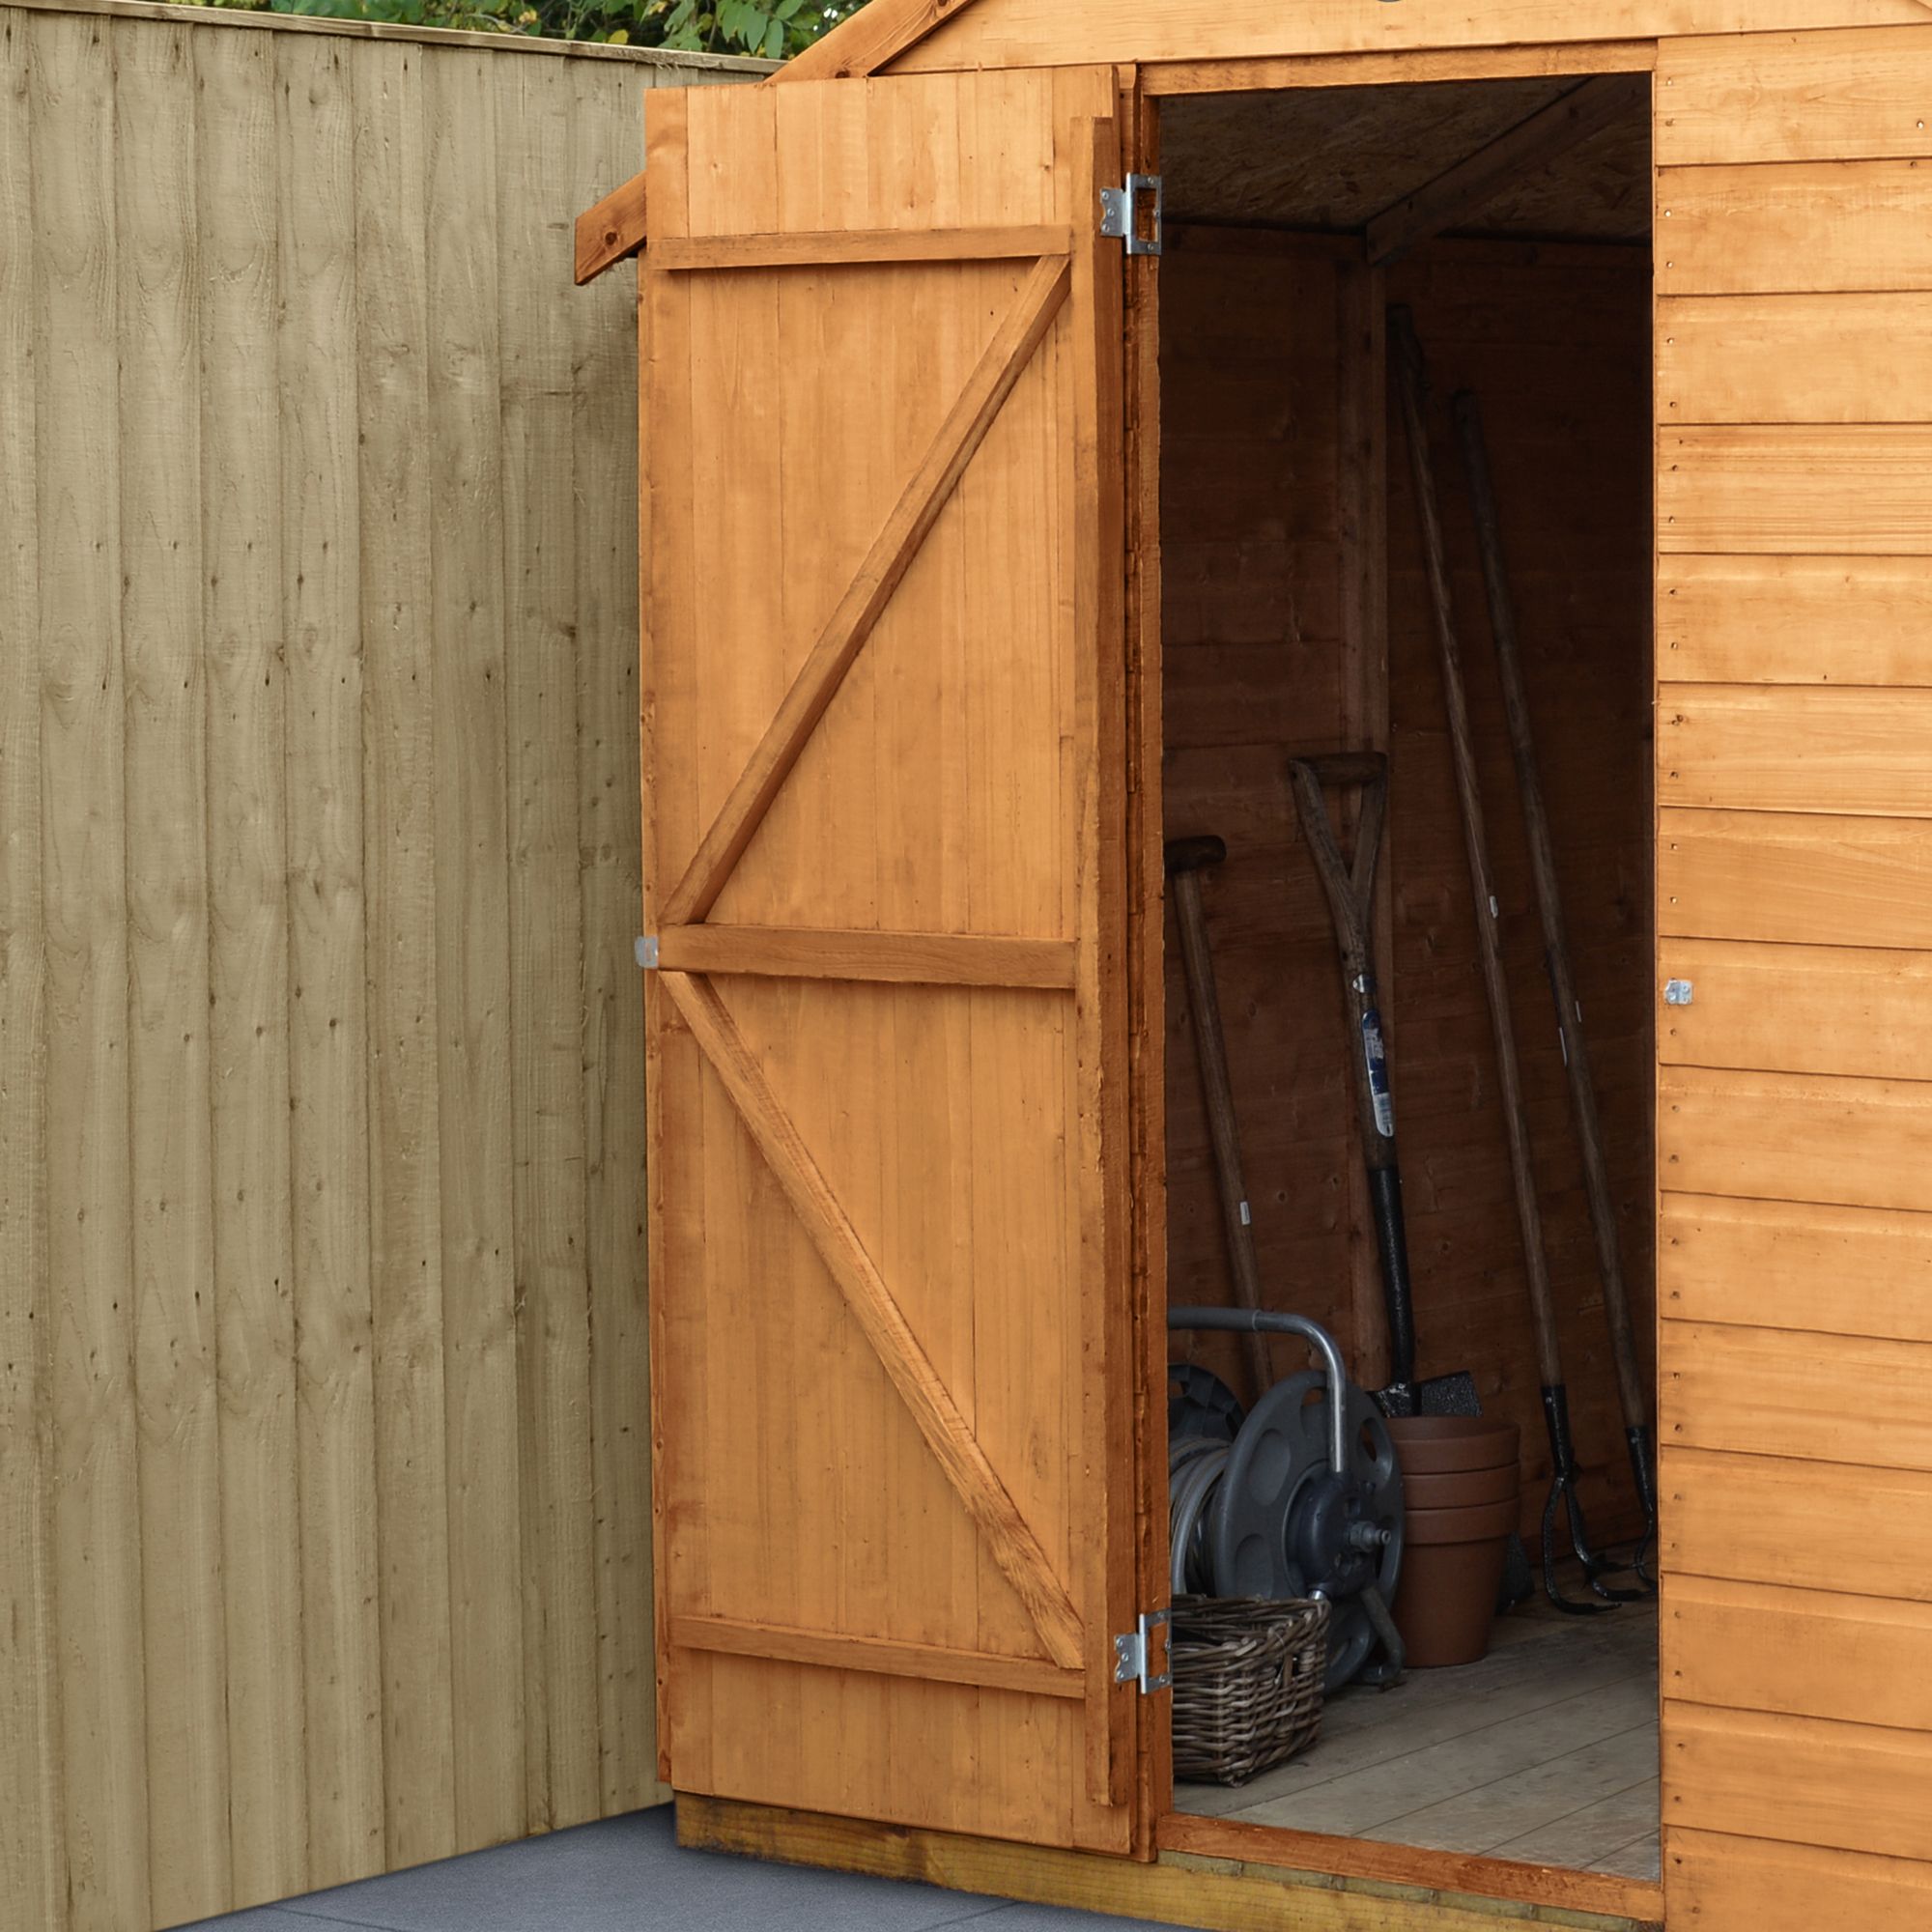 Forest Garden Shiplap 7x5 ft Pent Wooden Shed with floor & 2 windows - Assembly service included